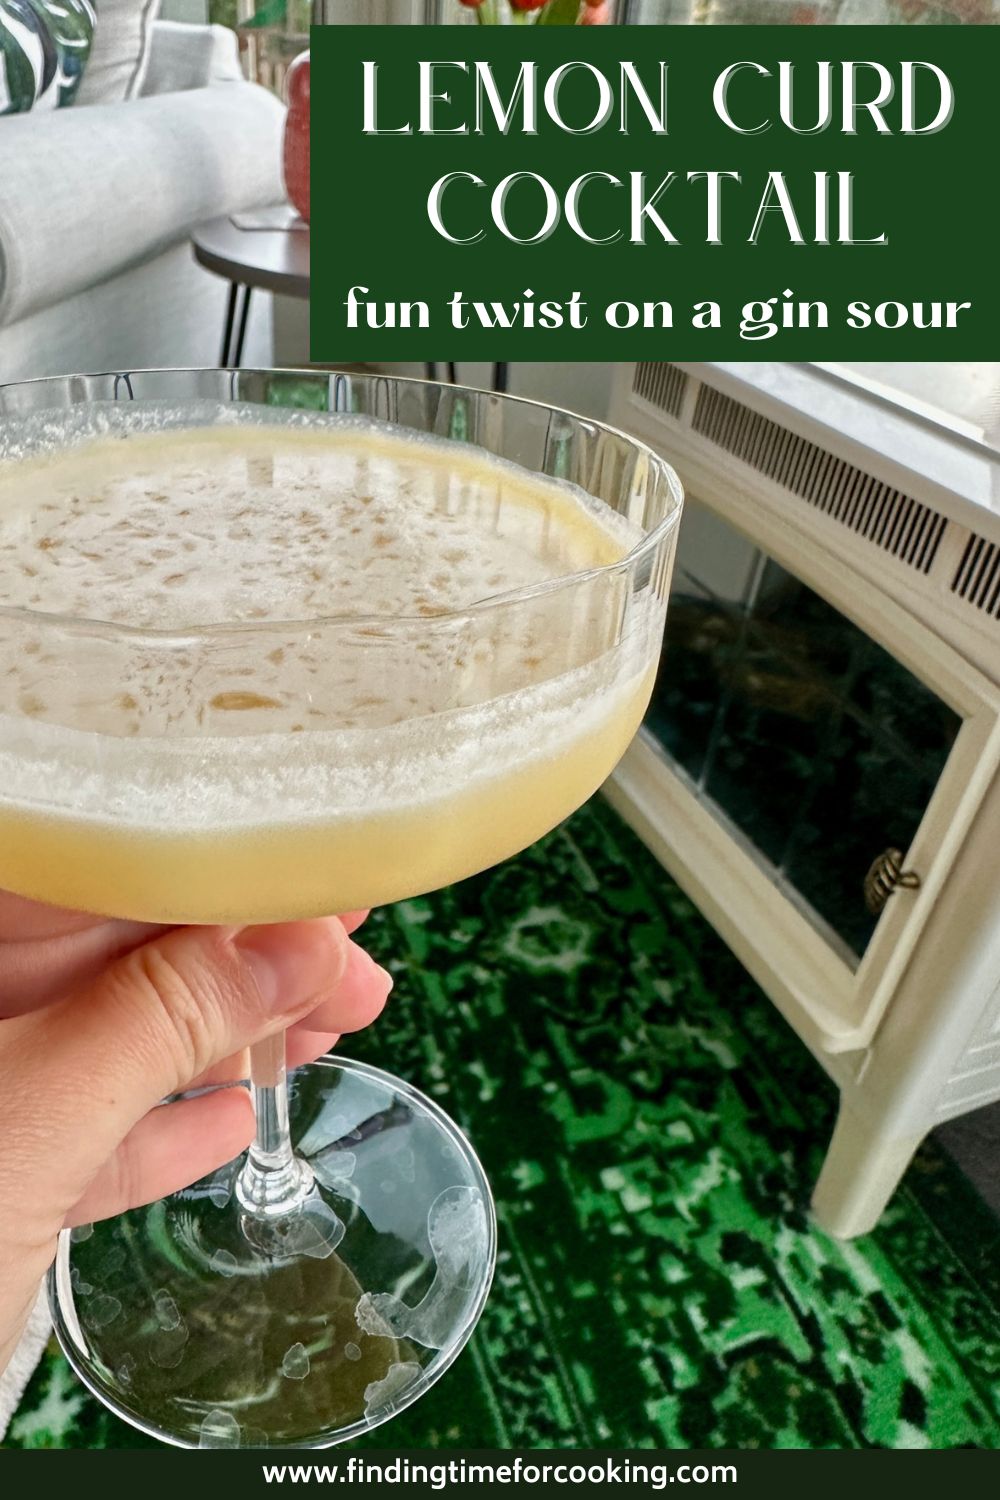 Lemon Curd Cocktailc A Fun Twist on a Gin Sour | This lemon curd cocktail is a different take on a classic gin sour...a perfect spring or summer drink that is bright, creamy, tart, & a little sweet! A great way to use up lemon curd, what to make with leftover lemon curd, gin cocktail recipe, lemon gin cocktail, spring drink recipe. #drinkrecipe #cocktail #gincocktail #lemoncurd